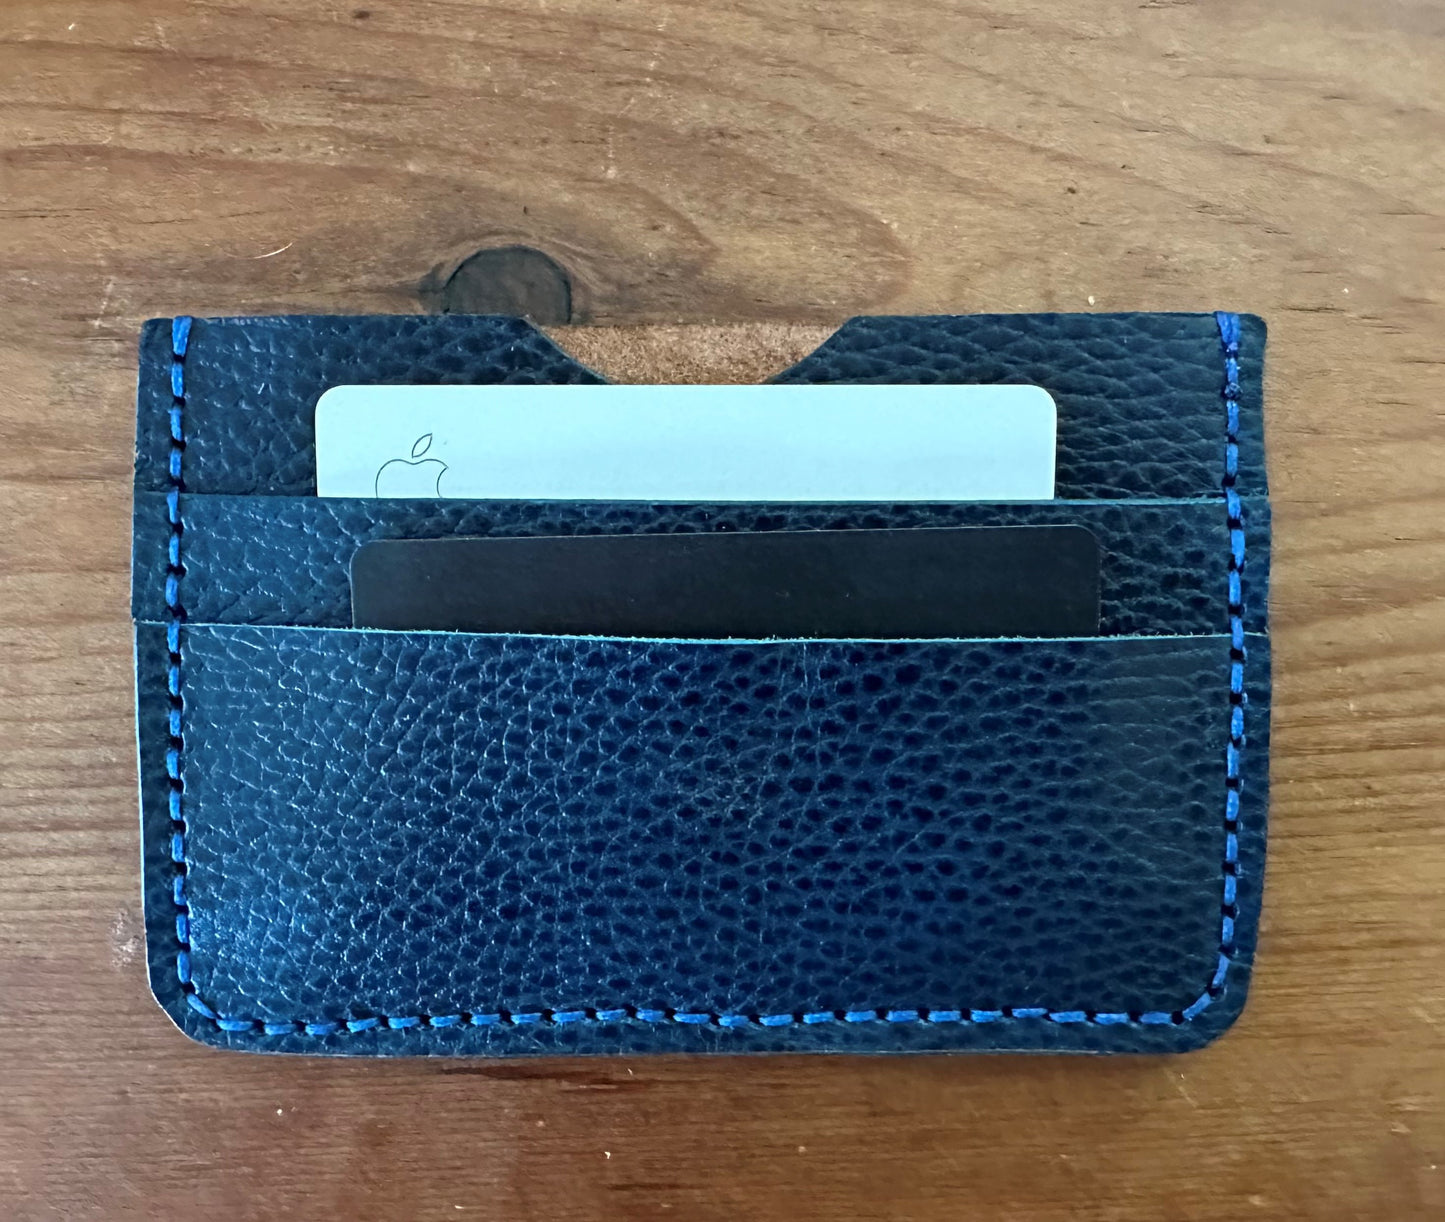 Billet Card & Cash Wallet (Dark Brown with Blue Pebbled Leather) - Made from a Retired English Saddle